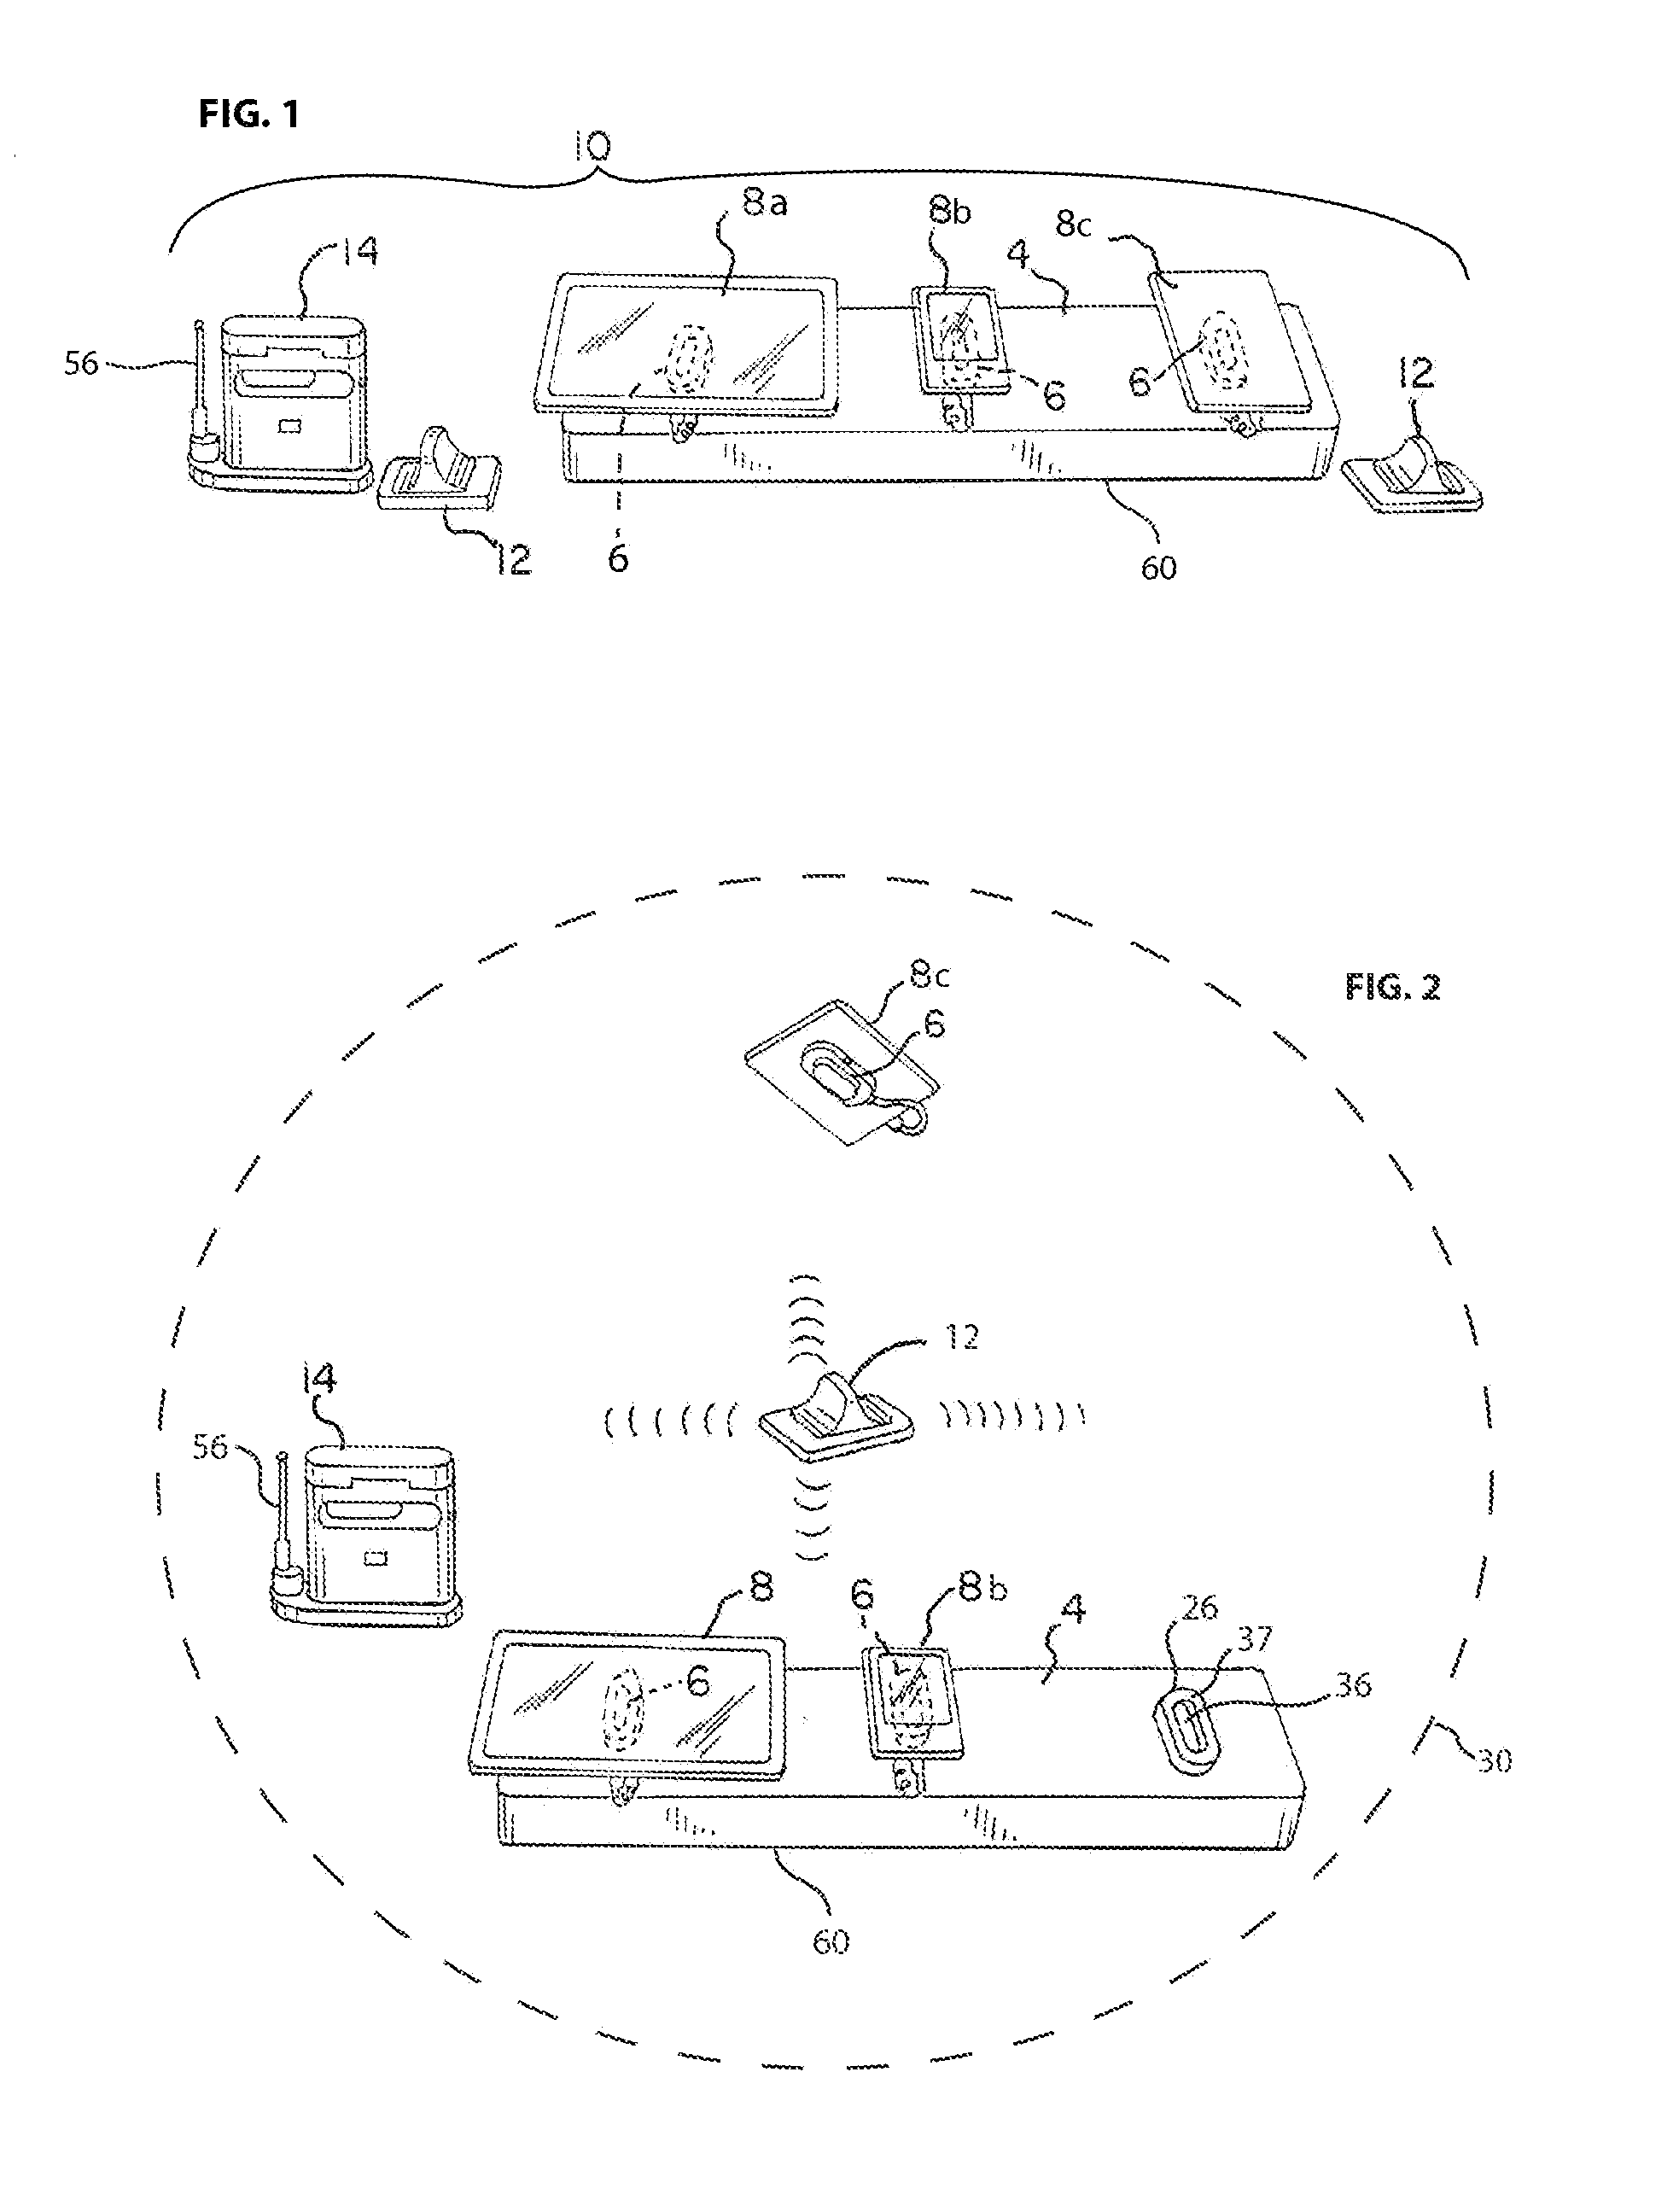 Apparatus, system and method for monitoring a device within a zone